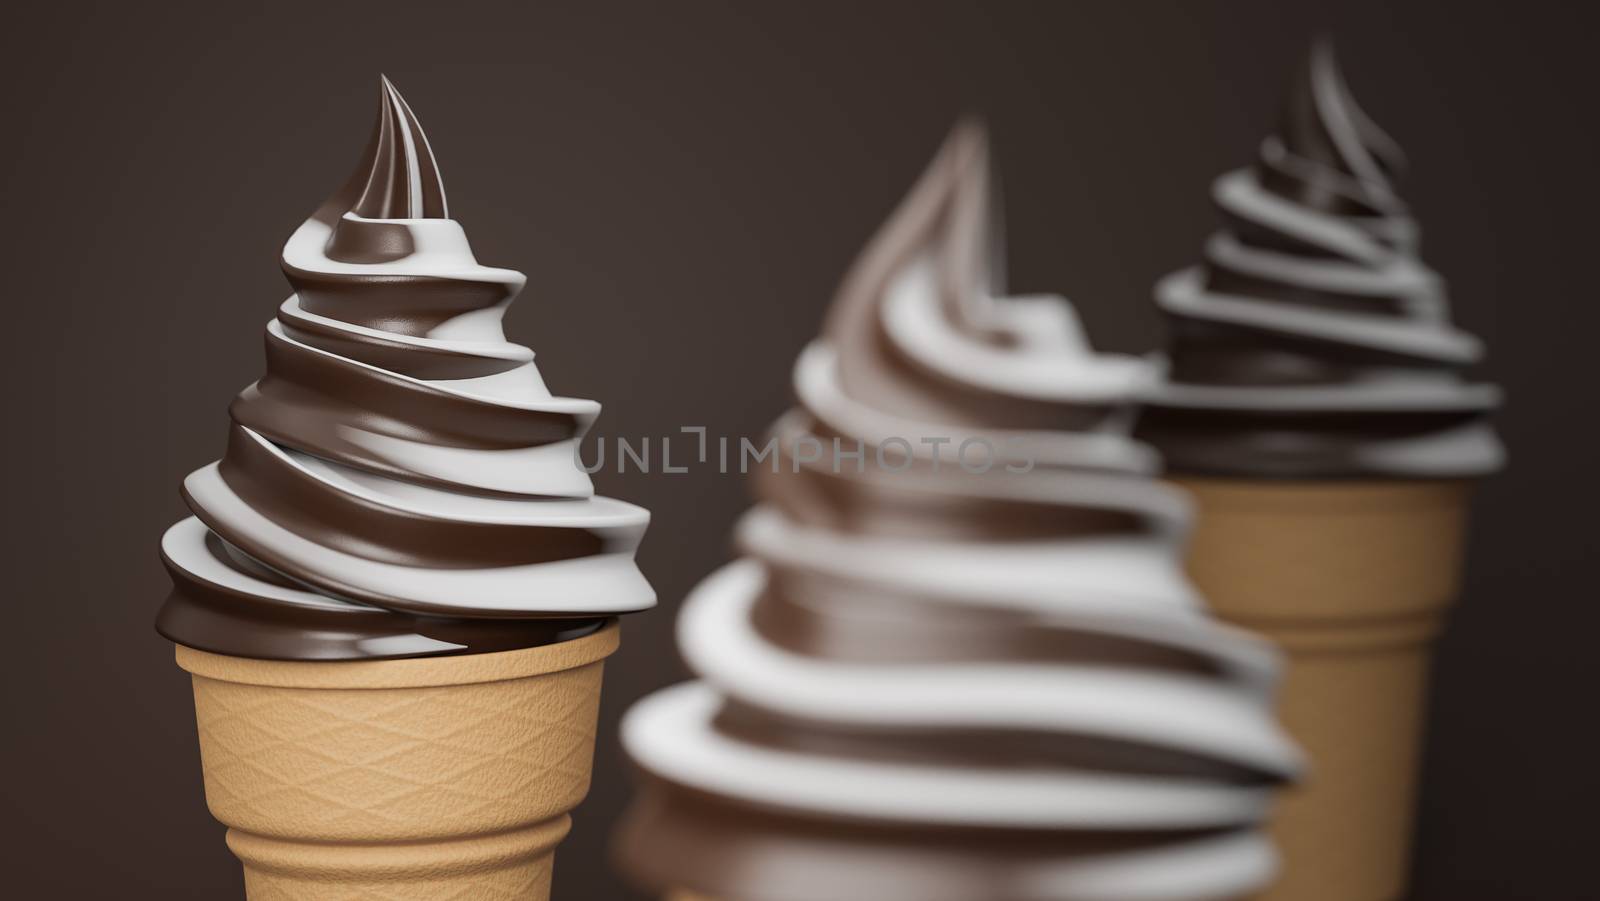 Soft serve ice cream of chocolate and milk flavours on crispy cone on brown background.,3d model and illustration. by anotestocker